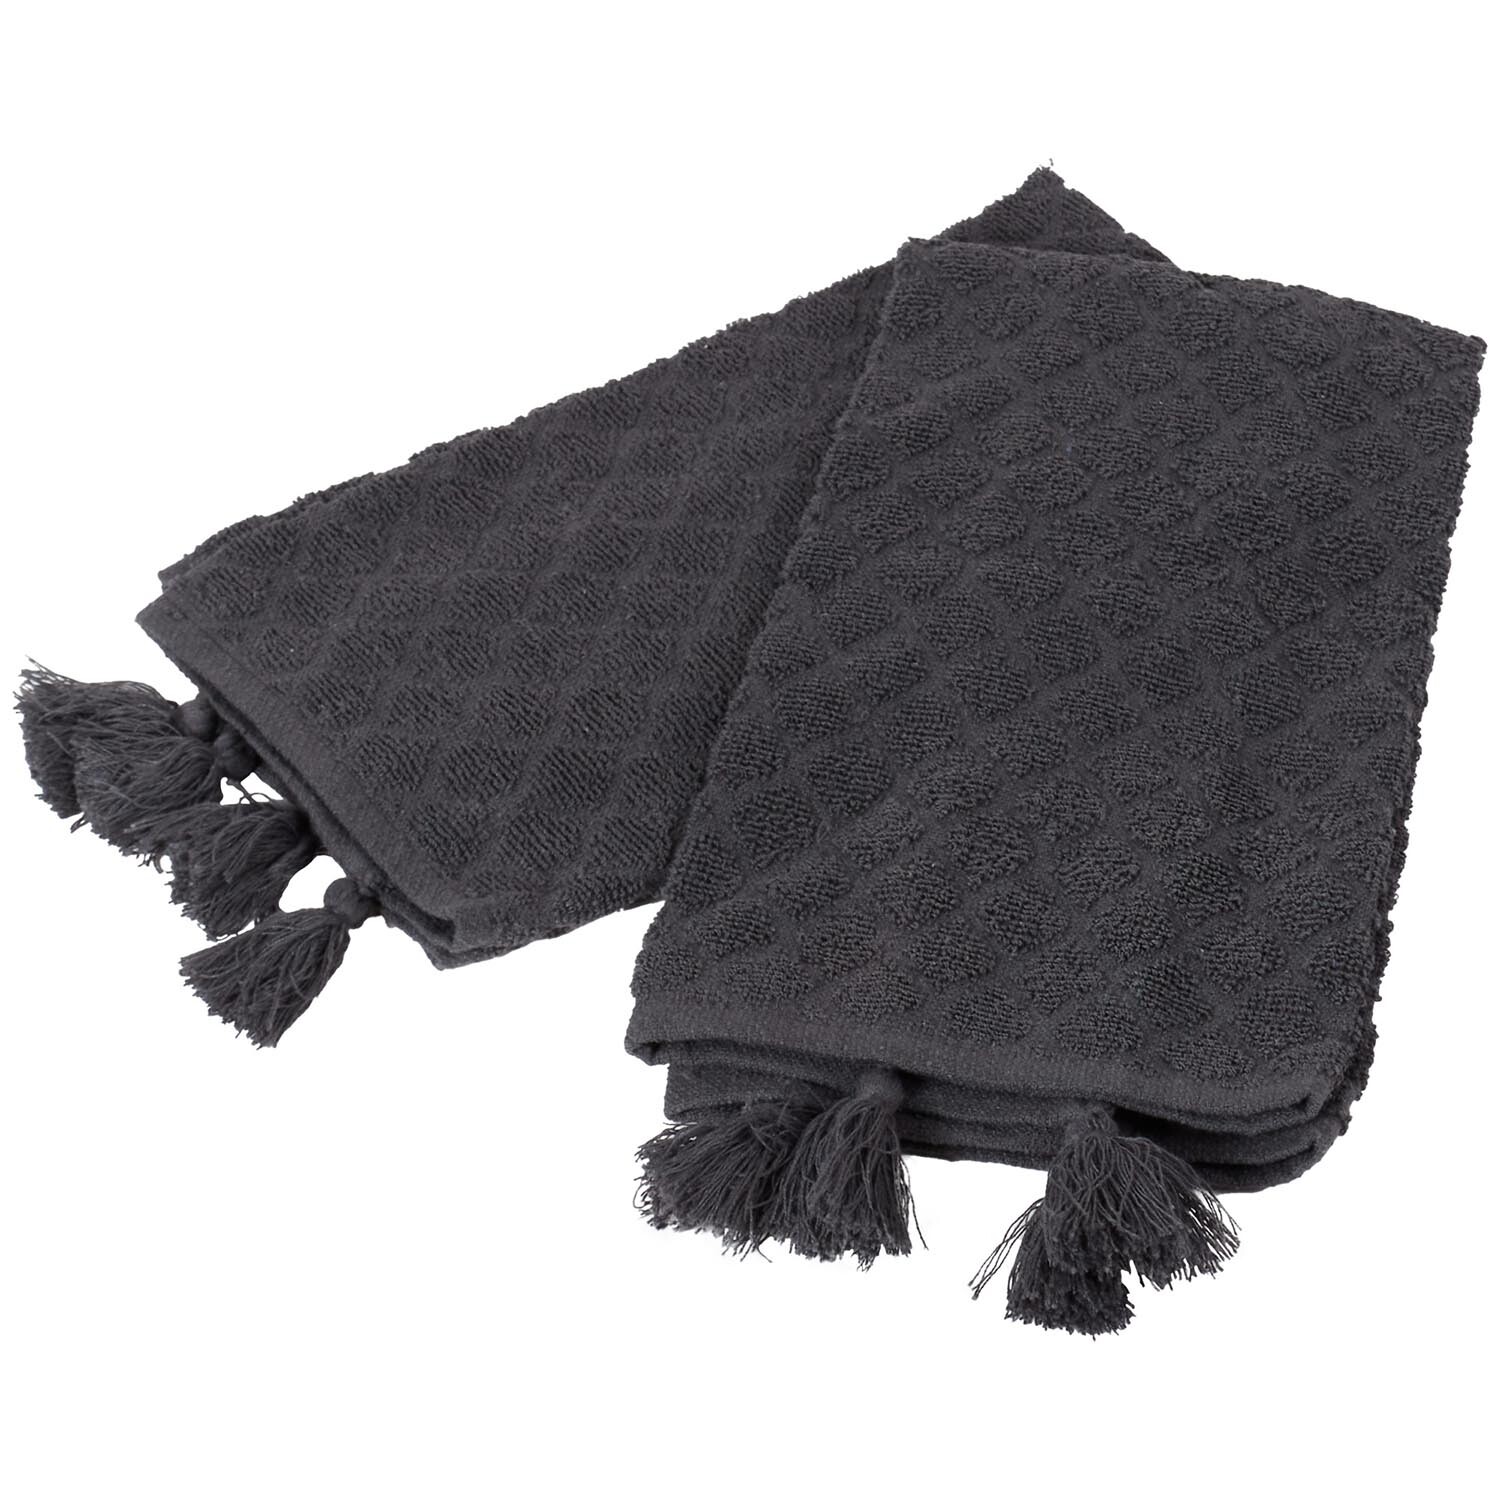 Pack of 2 Dobby Terry Kitchen Towels with Tassels - Dark Grey Image 5